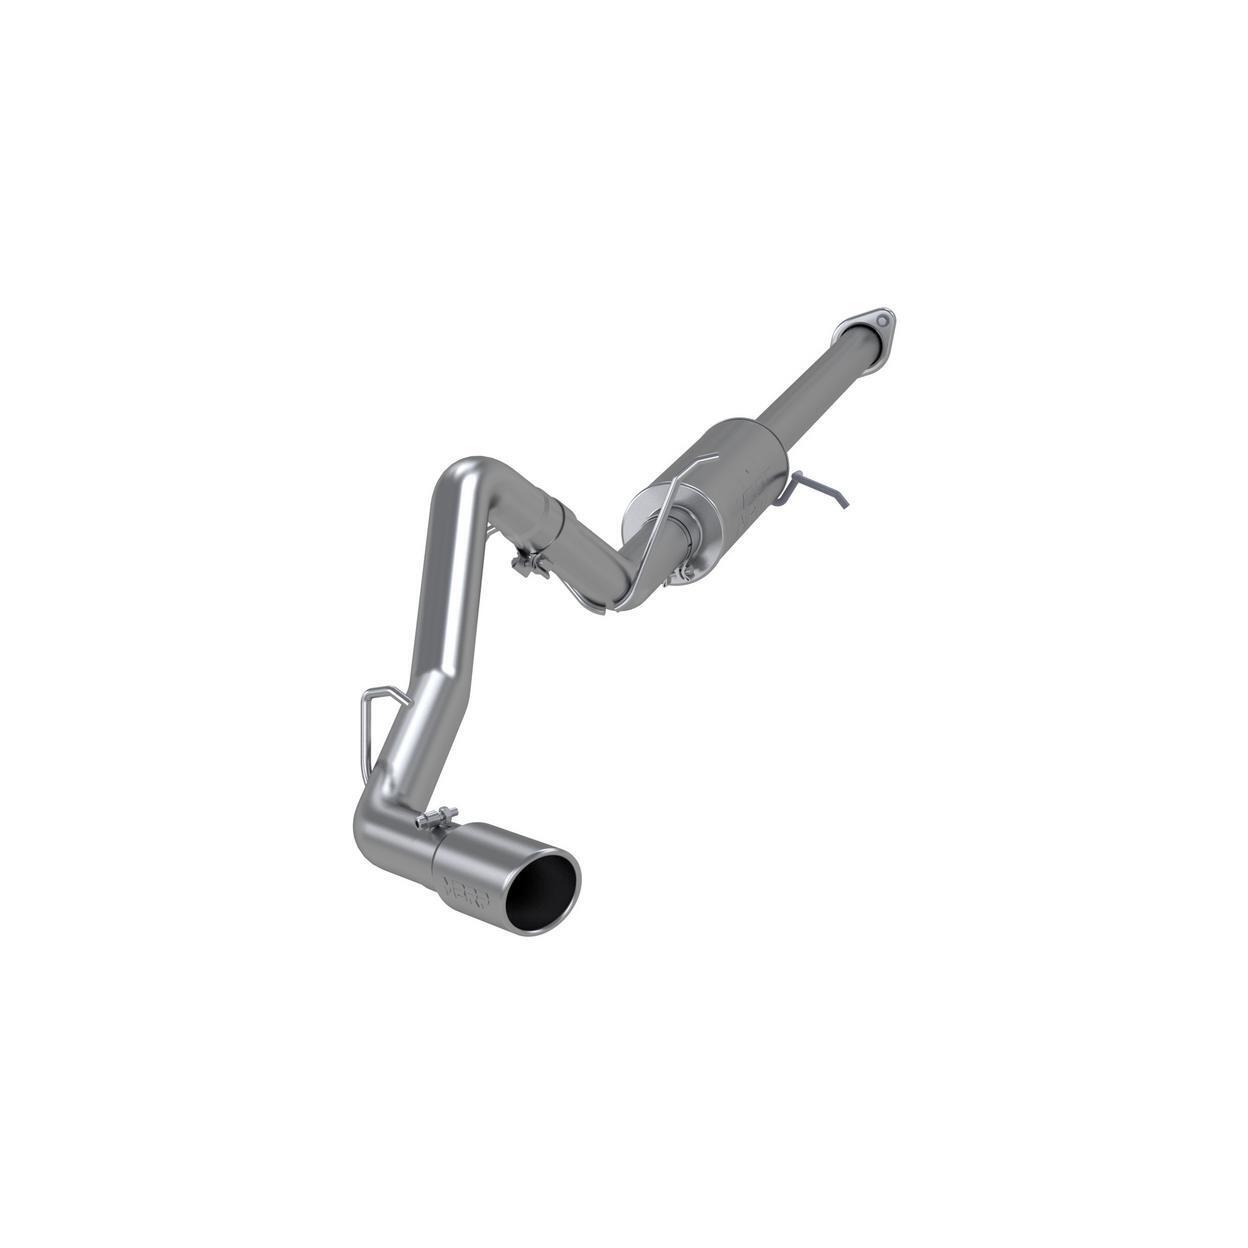 MBRP Exhaust S5036AL-HQ Exhaust System Kit for 2007 Chevrolet Silverado 1500